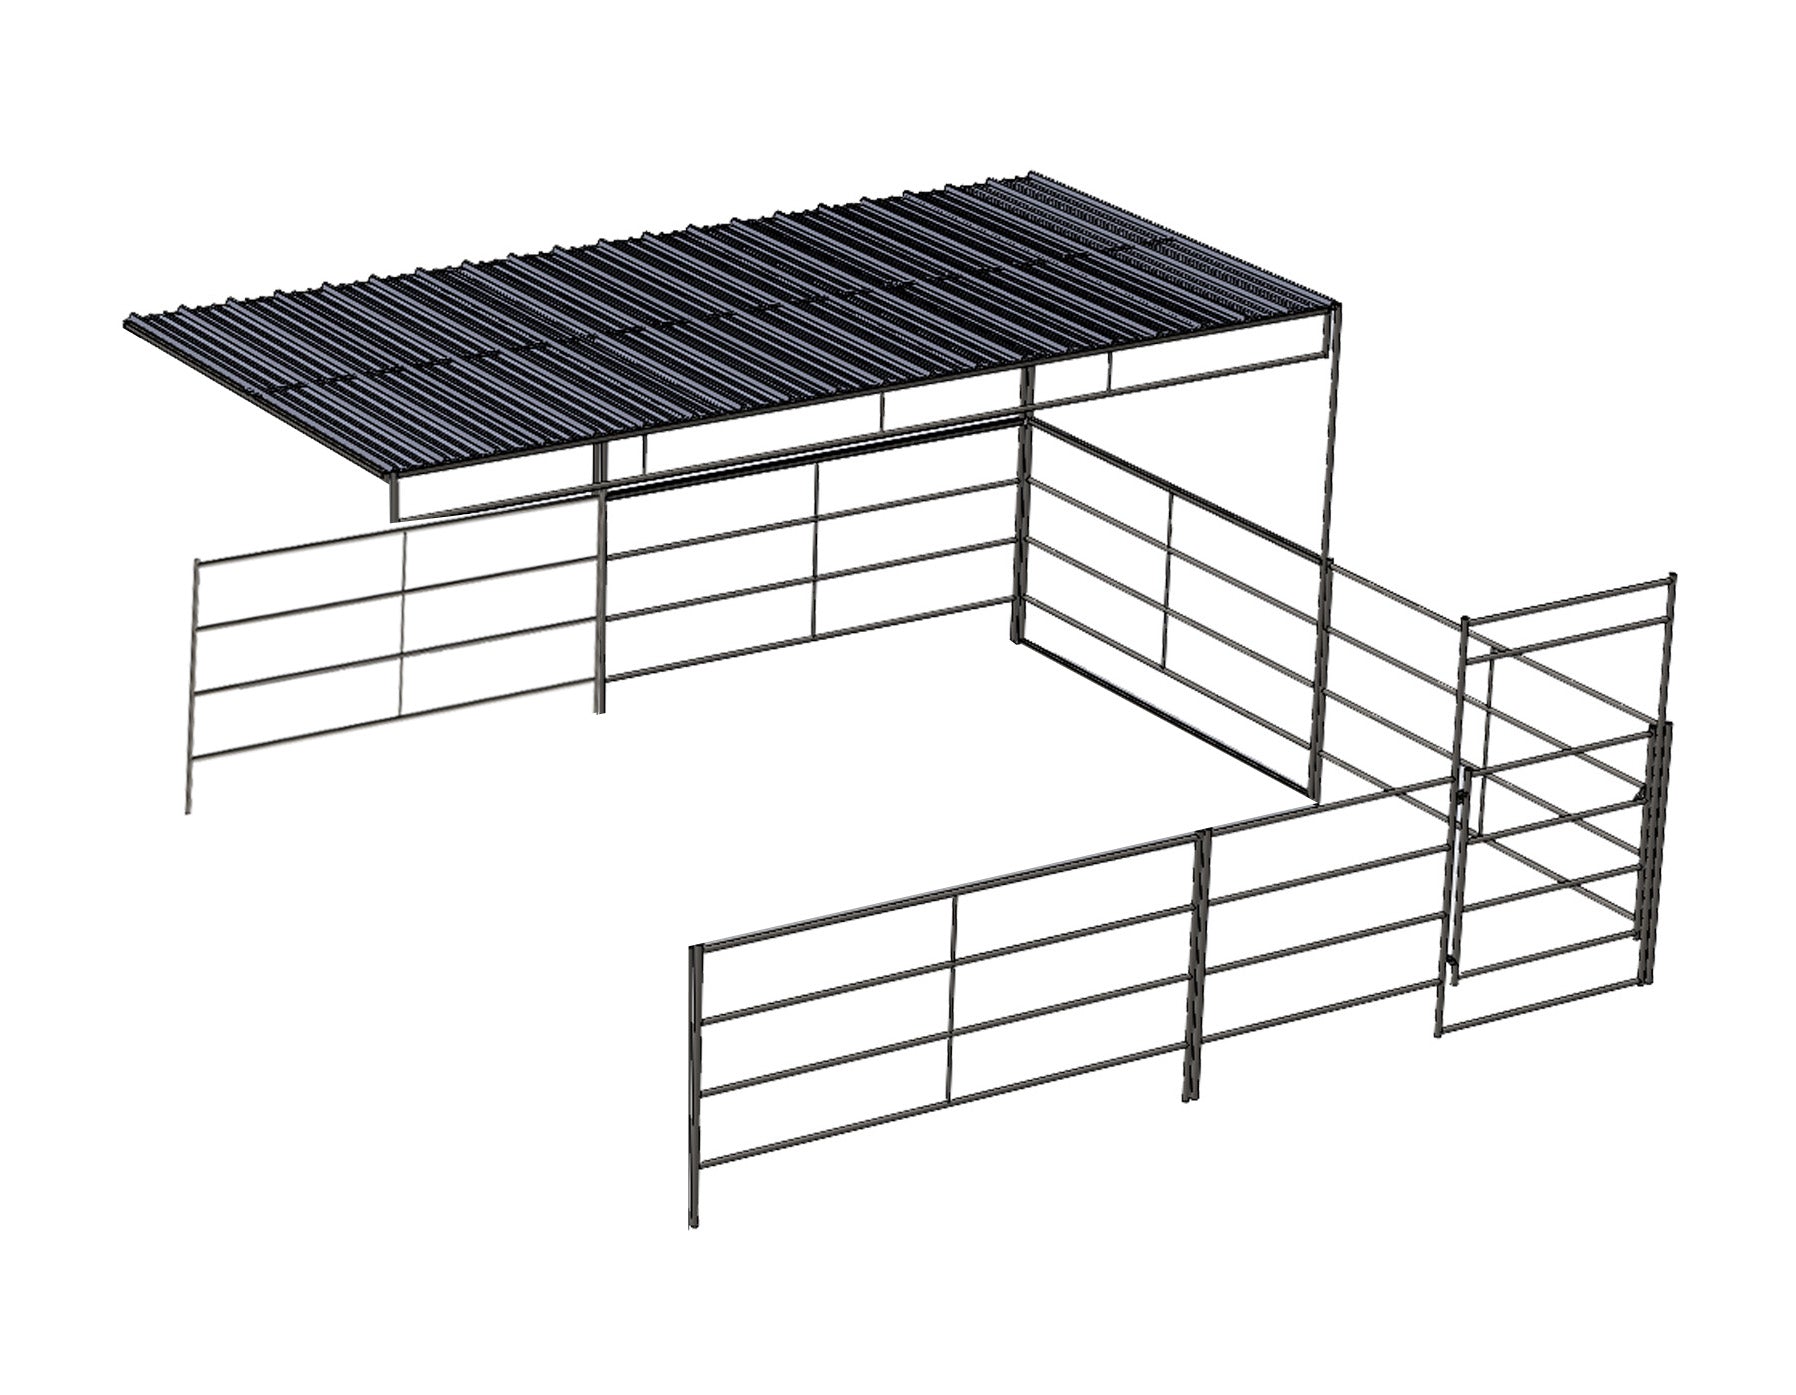 24 Ft X 24 Ft Add-On Stall with 12x24 Cover (5 Rail)